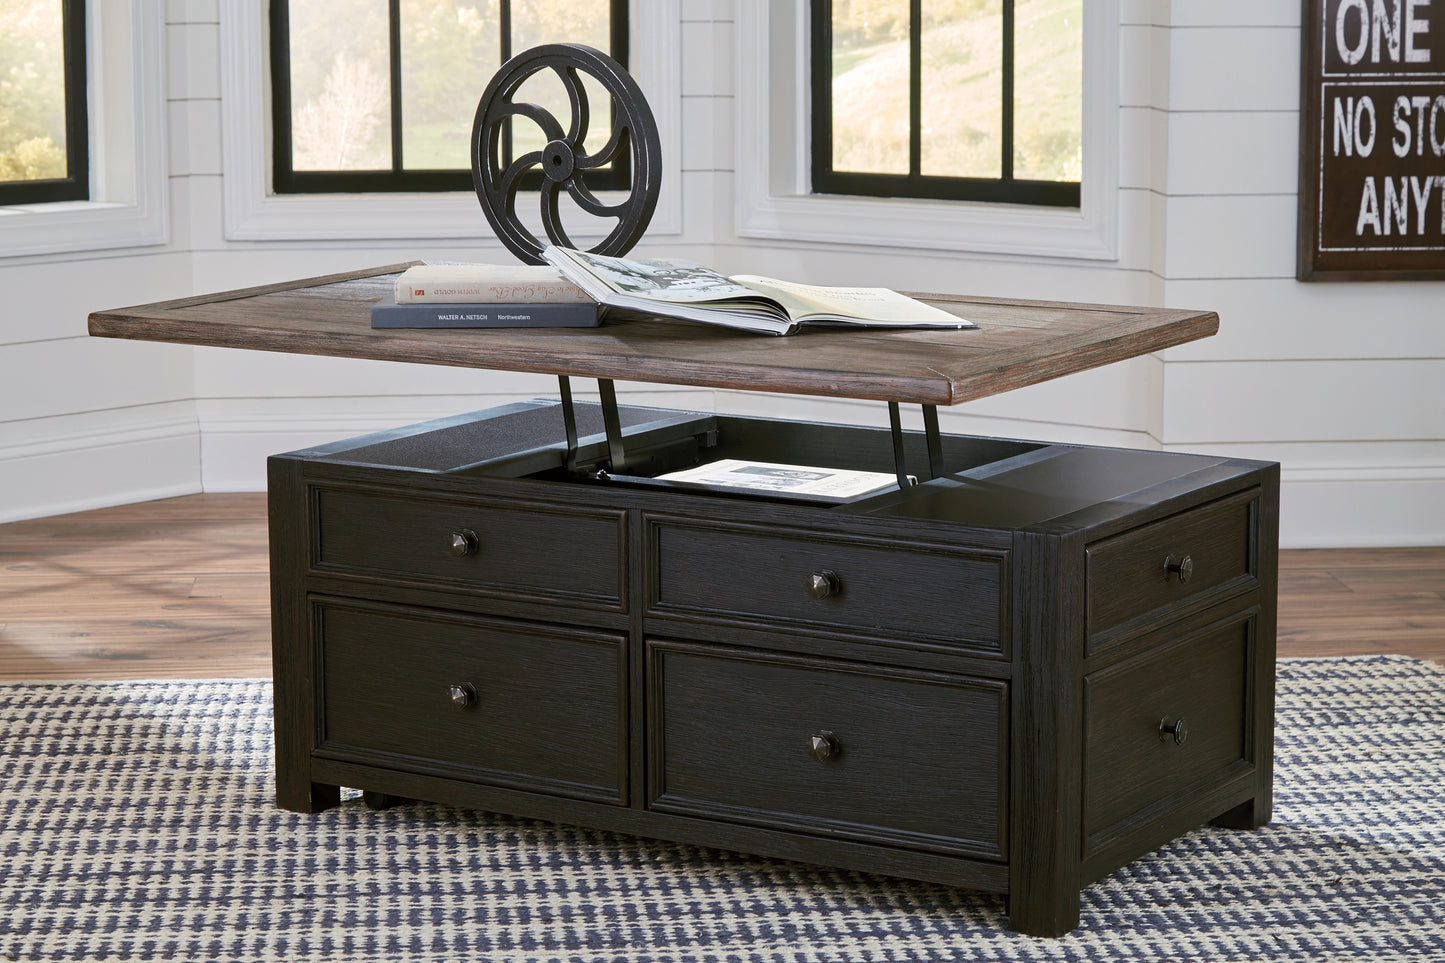 Tyler Creek Coffee Table with 1 End Table Wilson Furniture (OH)  in Bridgeport, Ohio. Serving Moundsville, Richmond, Smithfield, Cadiz, & St. Clairesville